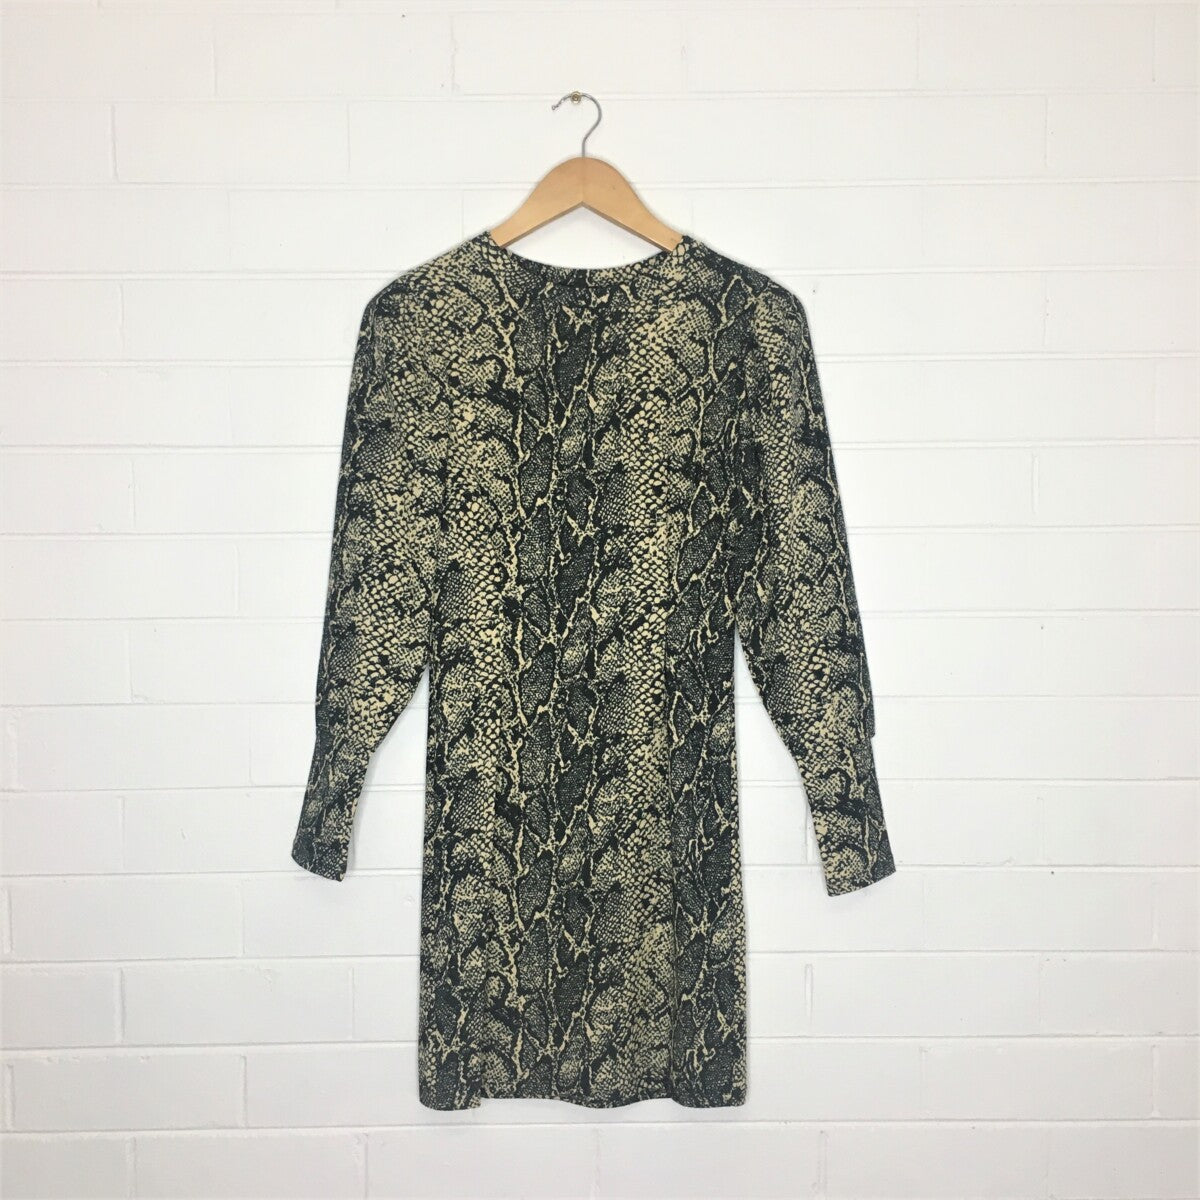 Topshop | dress | size 8 | knee length | new with tags